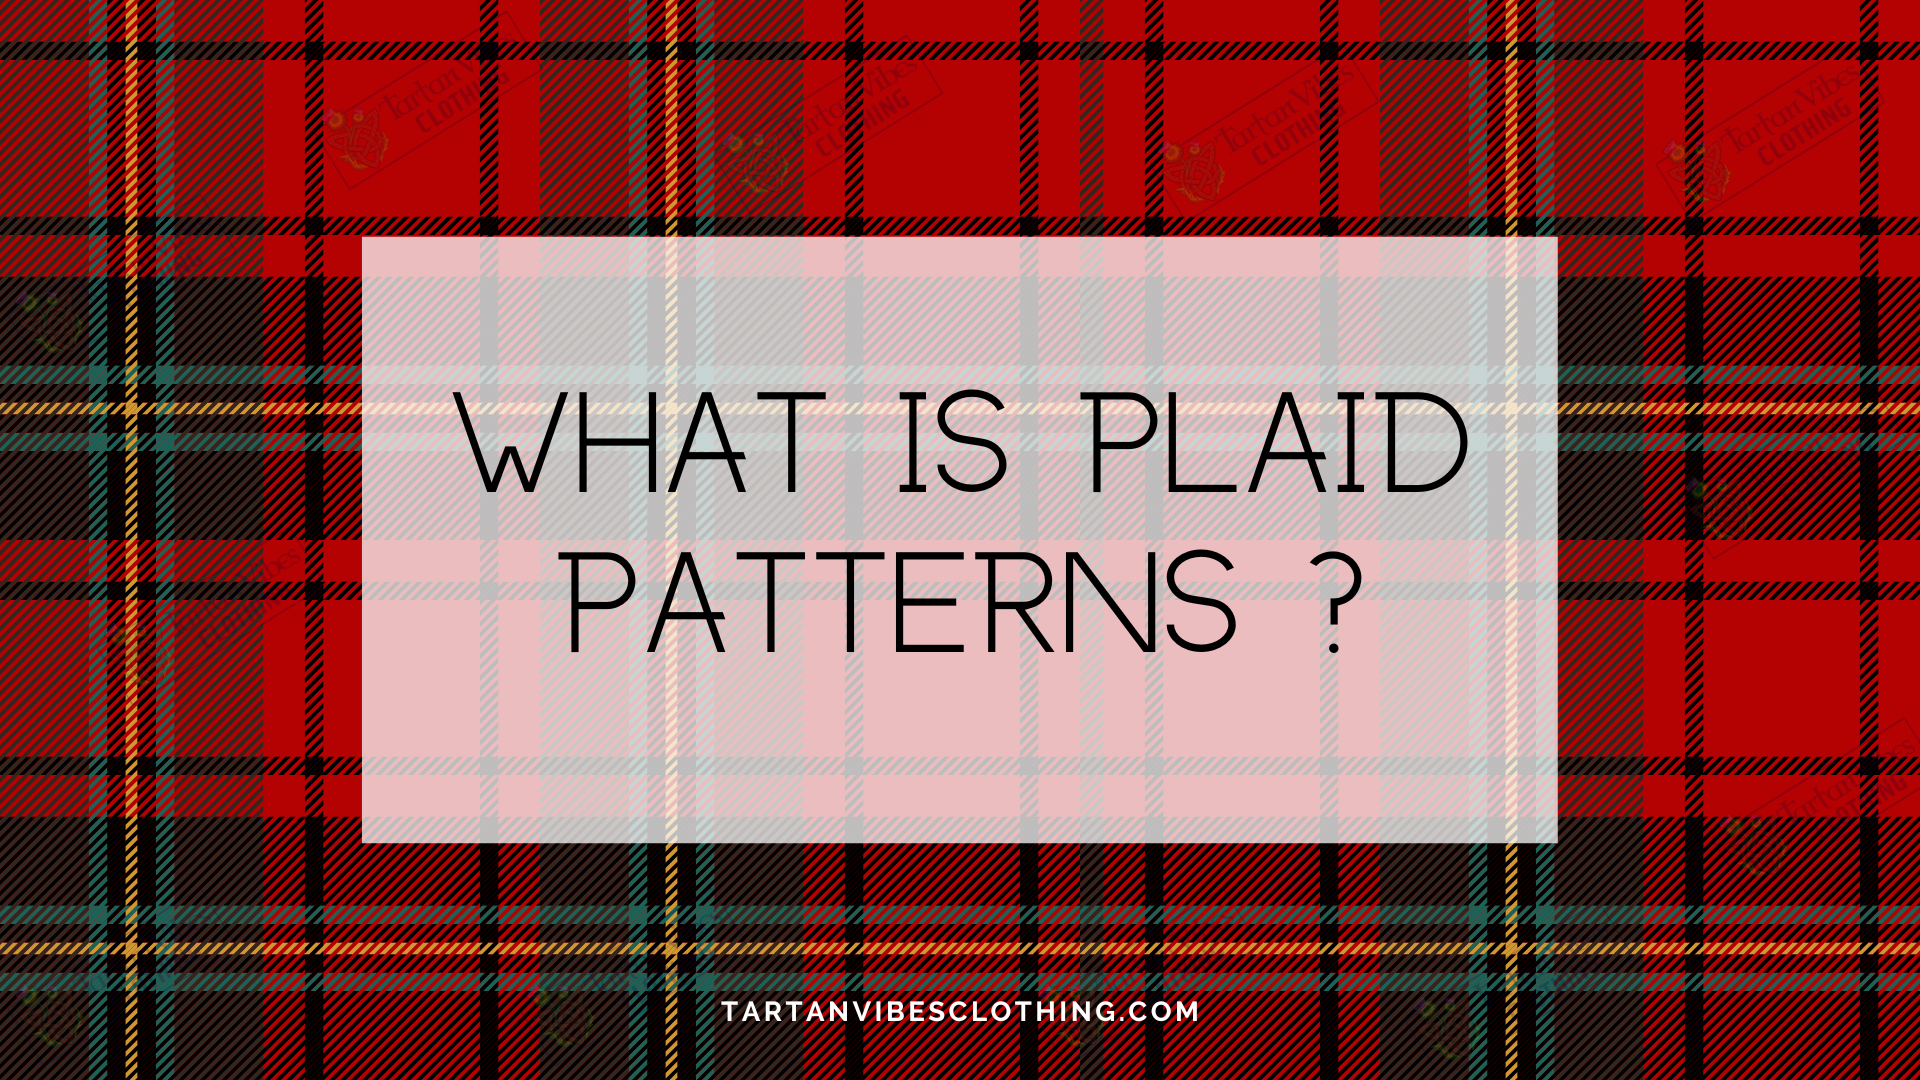 Definition and Overview of Plaid Patterns